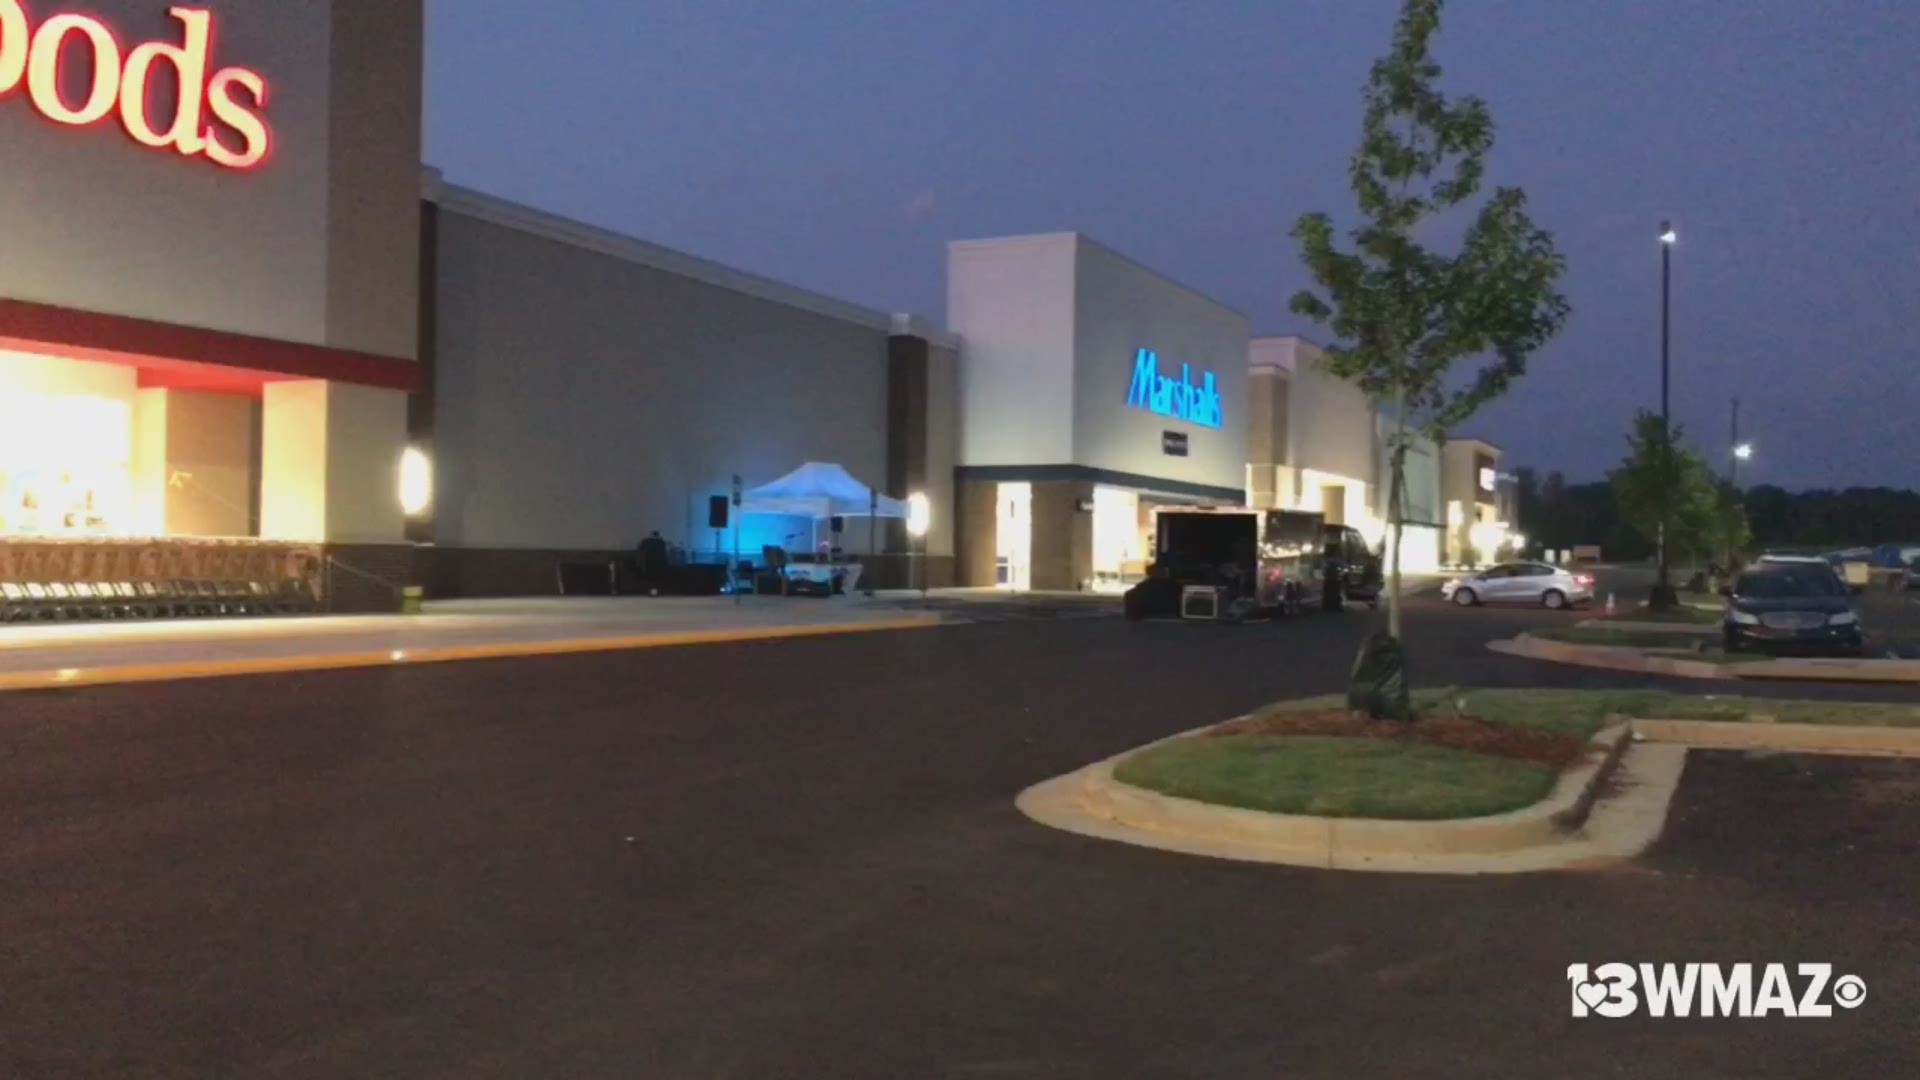 HomeGoods and Marshalls are opening Thursday at 8 a.m. The new North Macon Plaza is located off Bass Road.